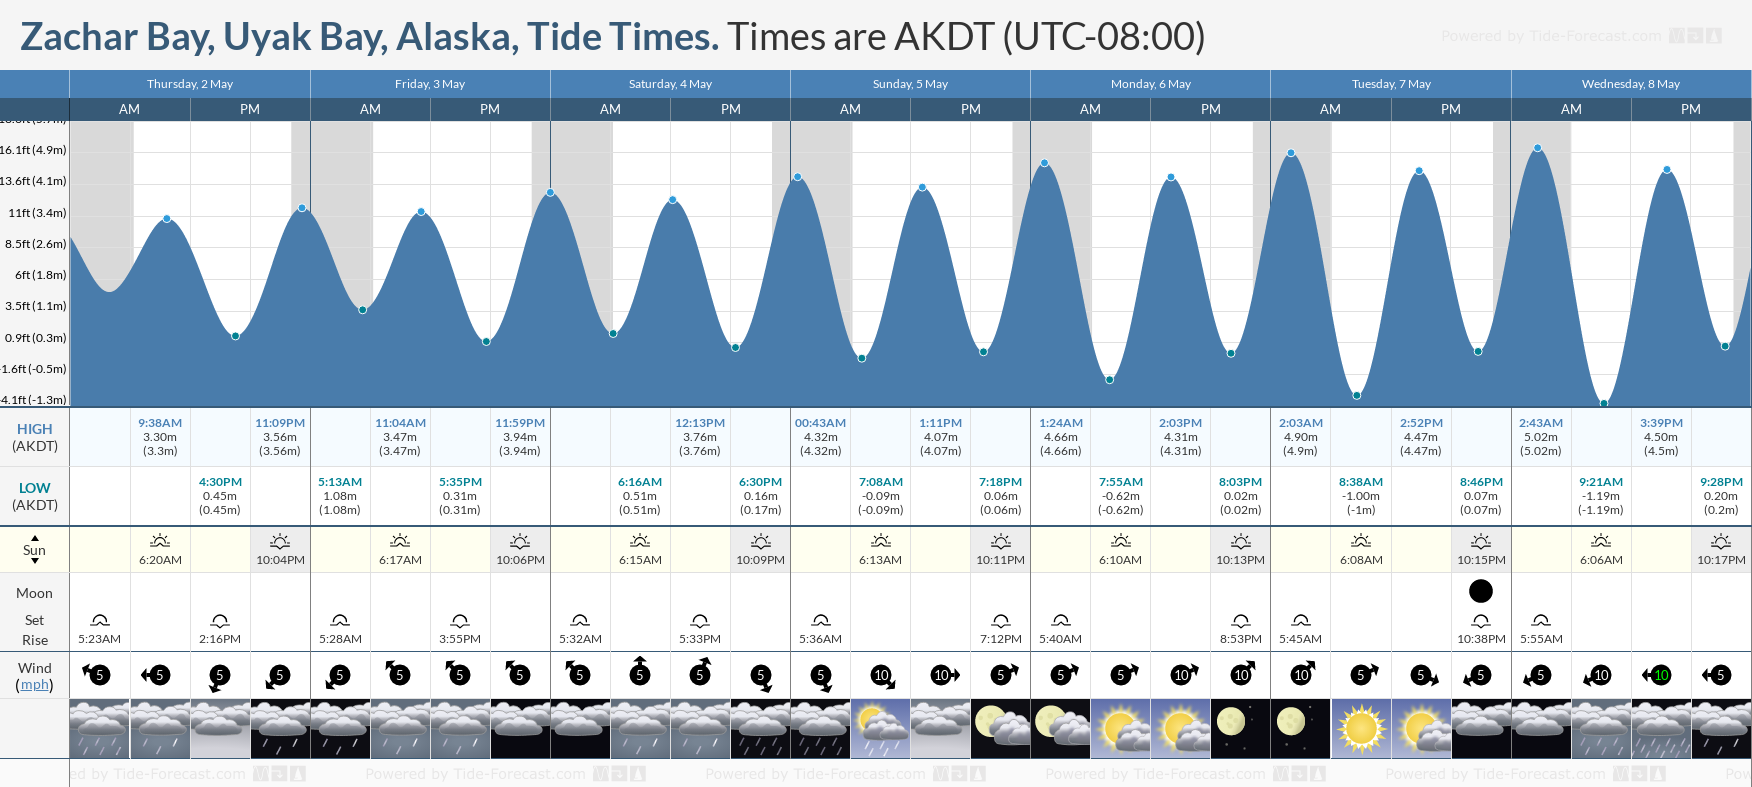 Zachar Bay, Uyak Bay, Alaska Tide Chart including high and low tide tide times for the next 7 days